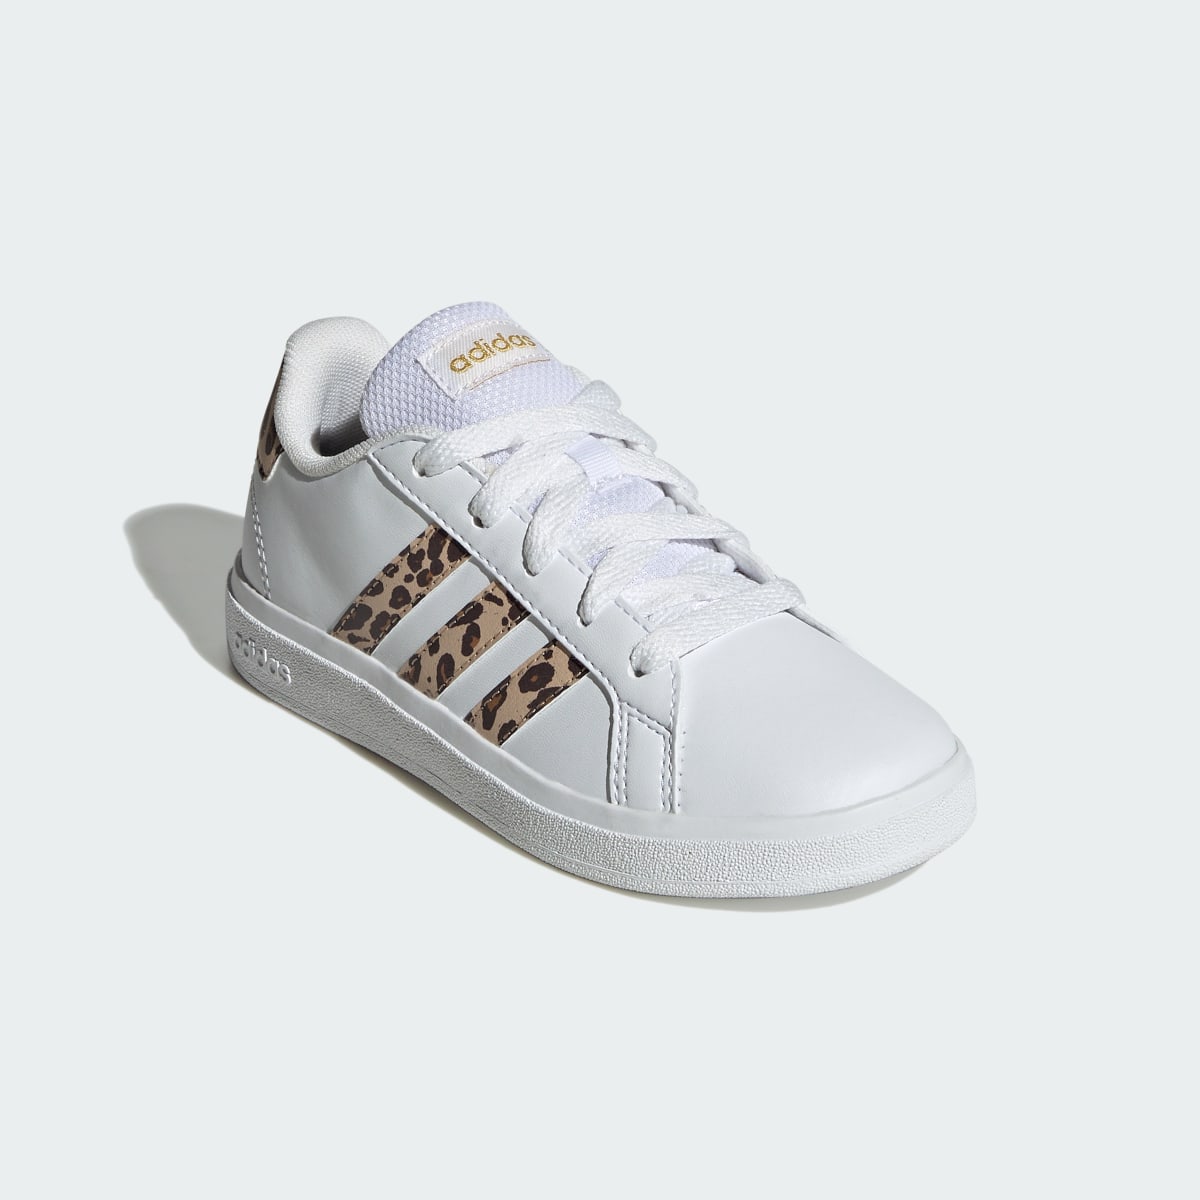 Adidas Grand Court 2.0 Shoes Kids. 5